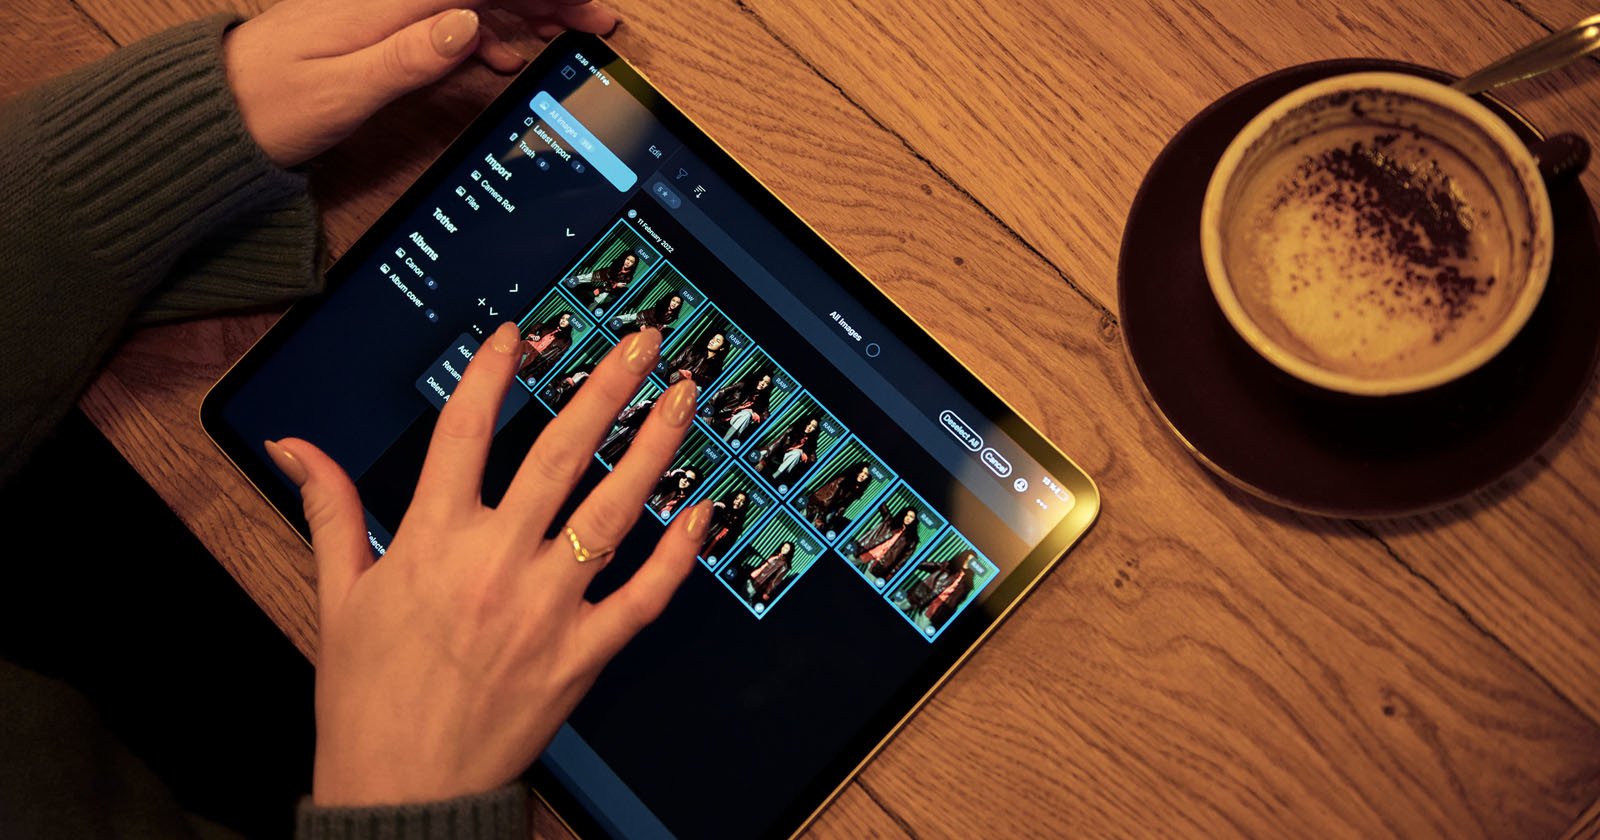  capture one ipad app will cost month coming 